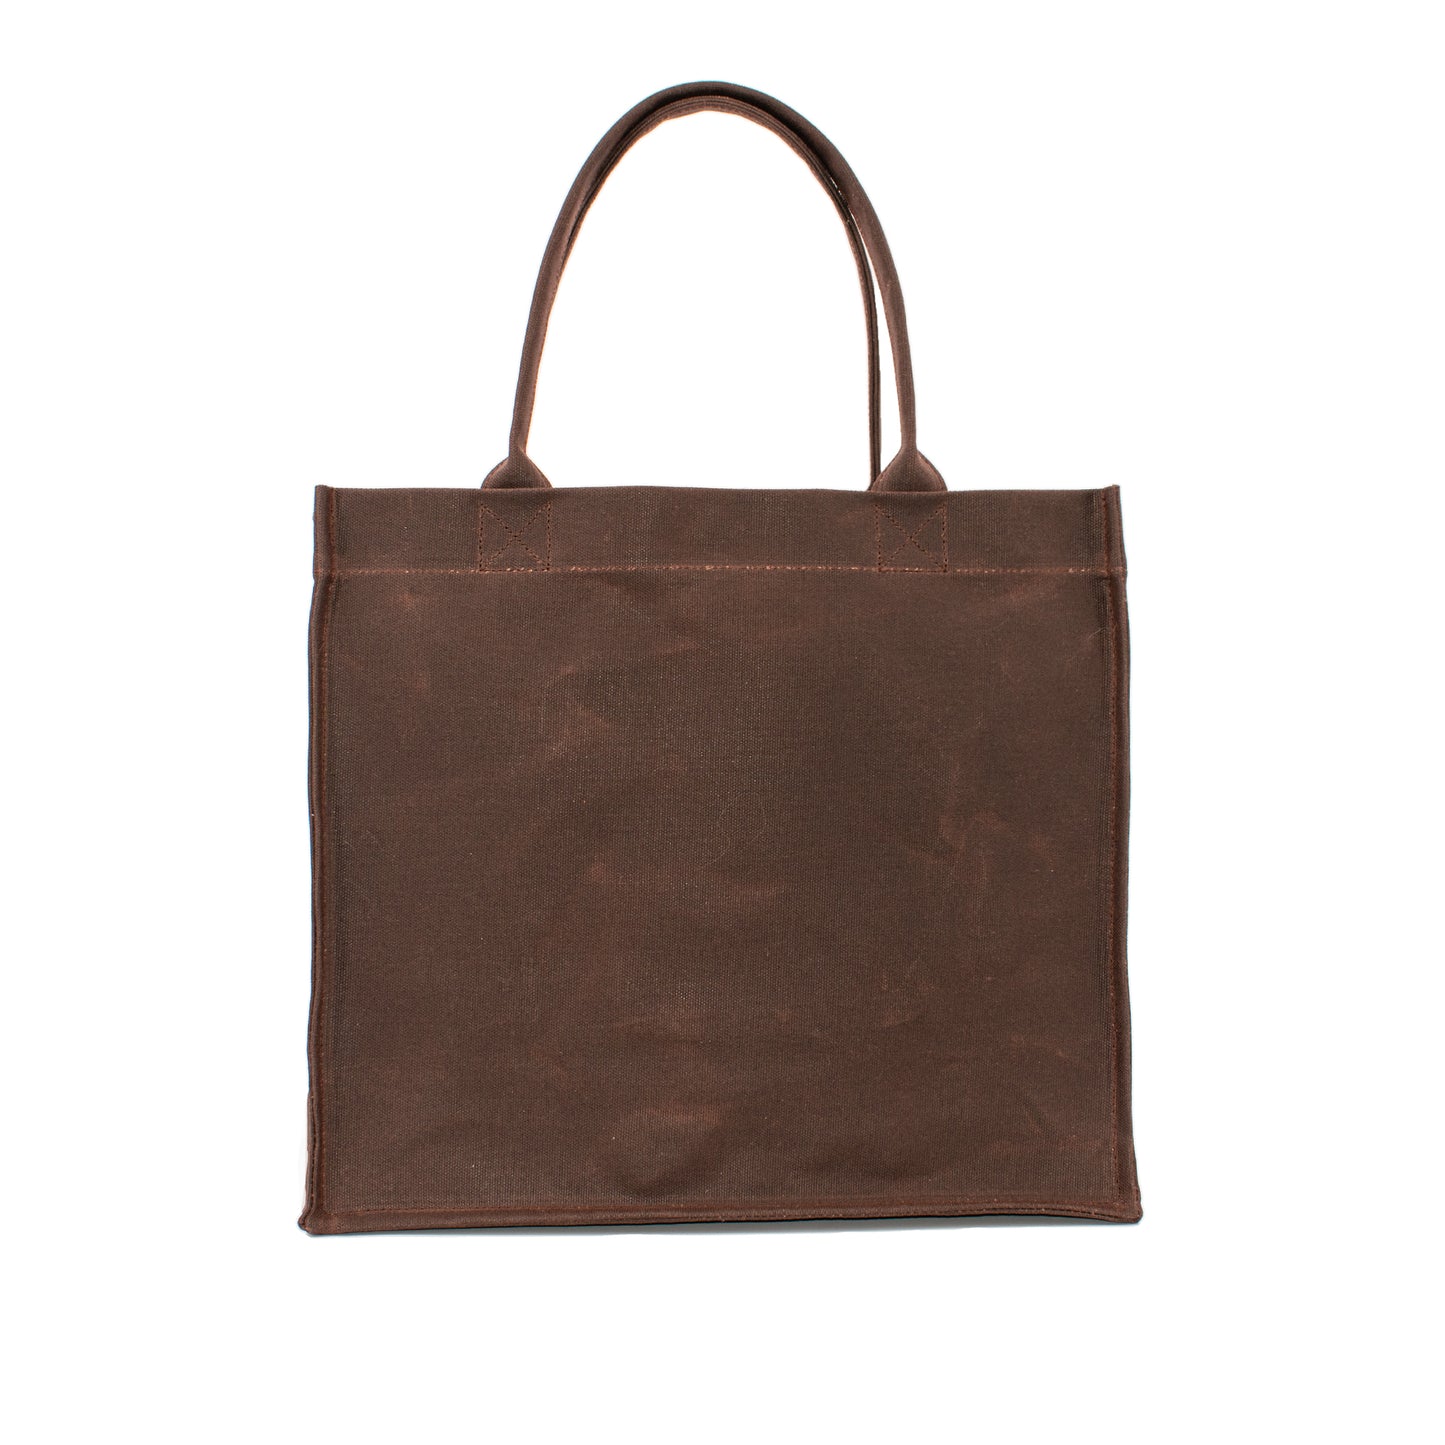 HCANSS WAXED CANVAS CHOCOLATE LARGE TOTE BAG